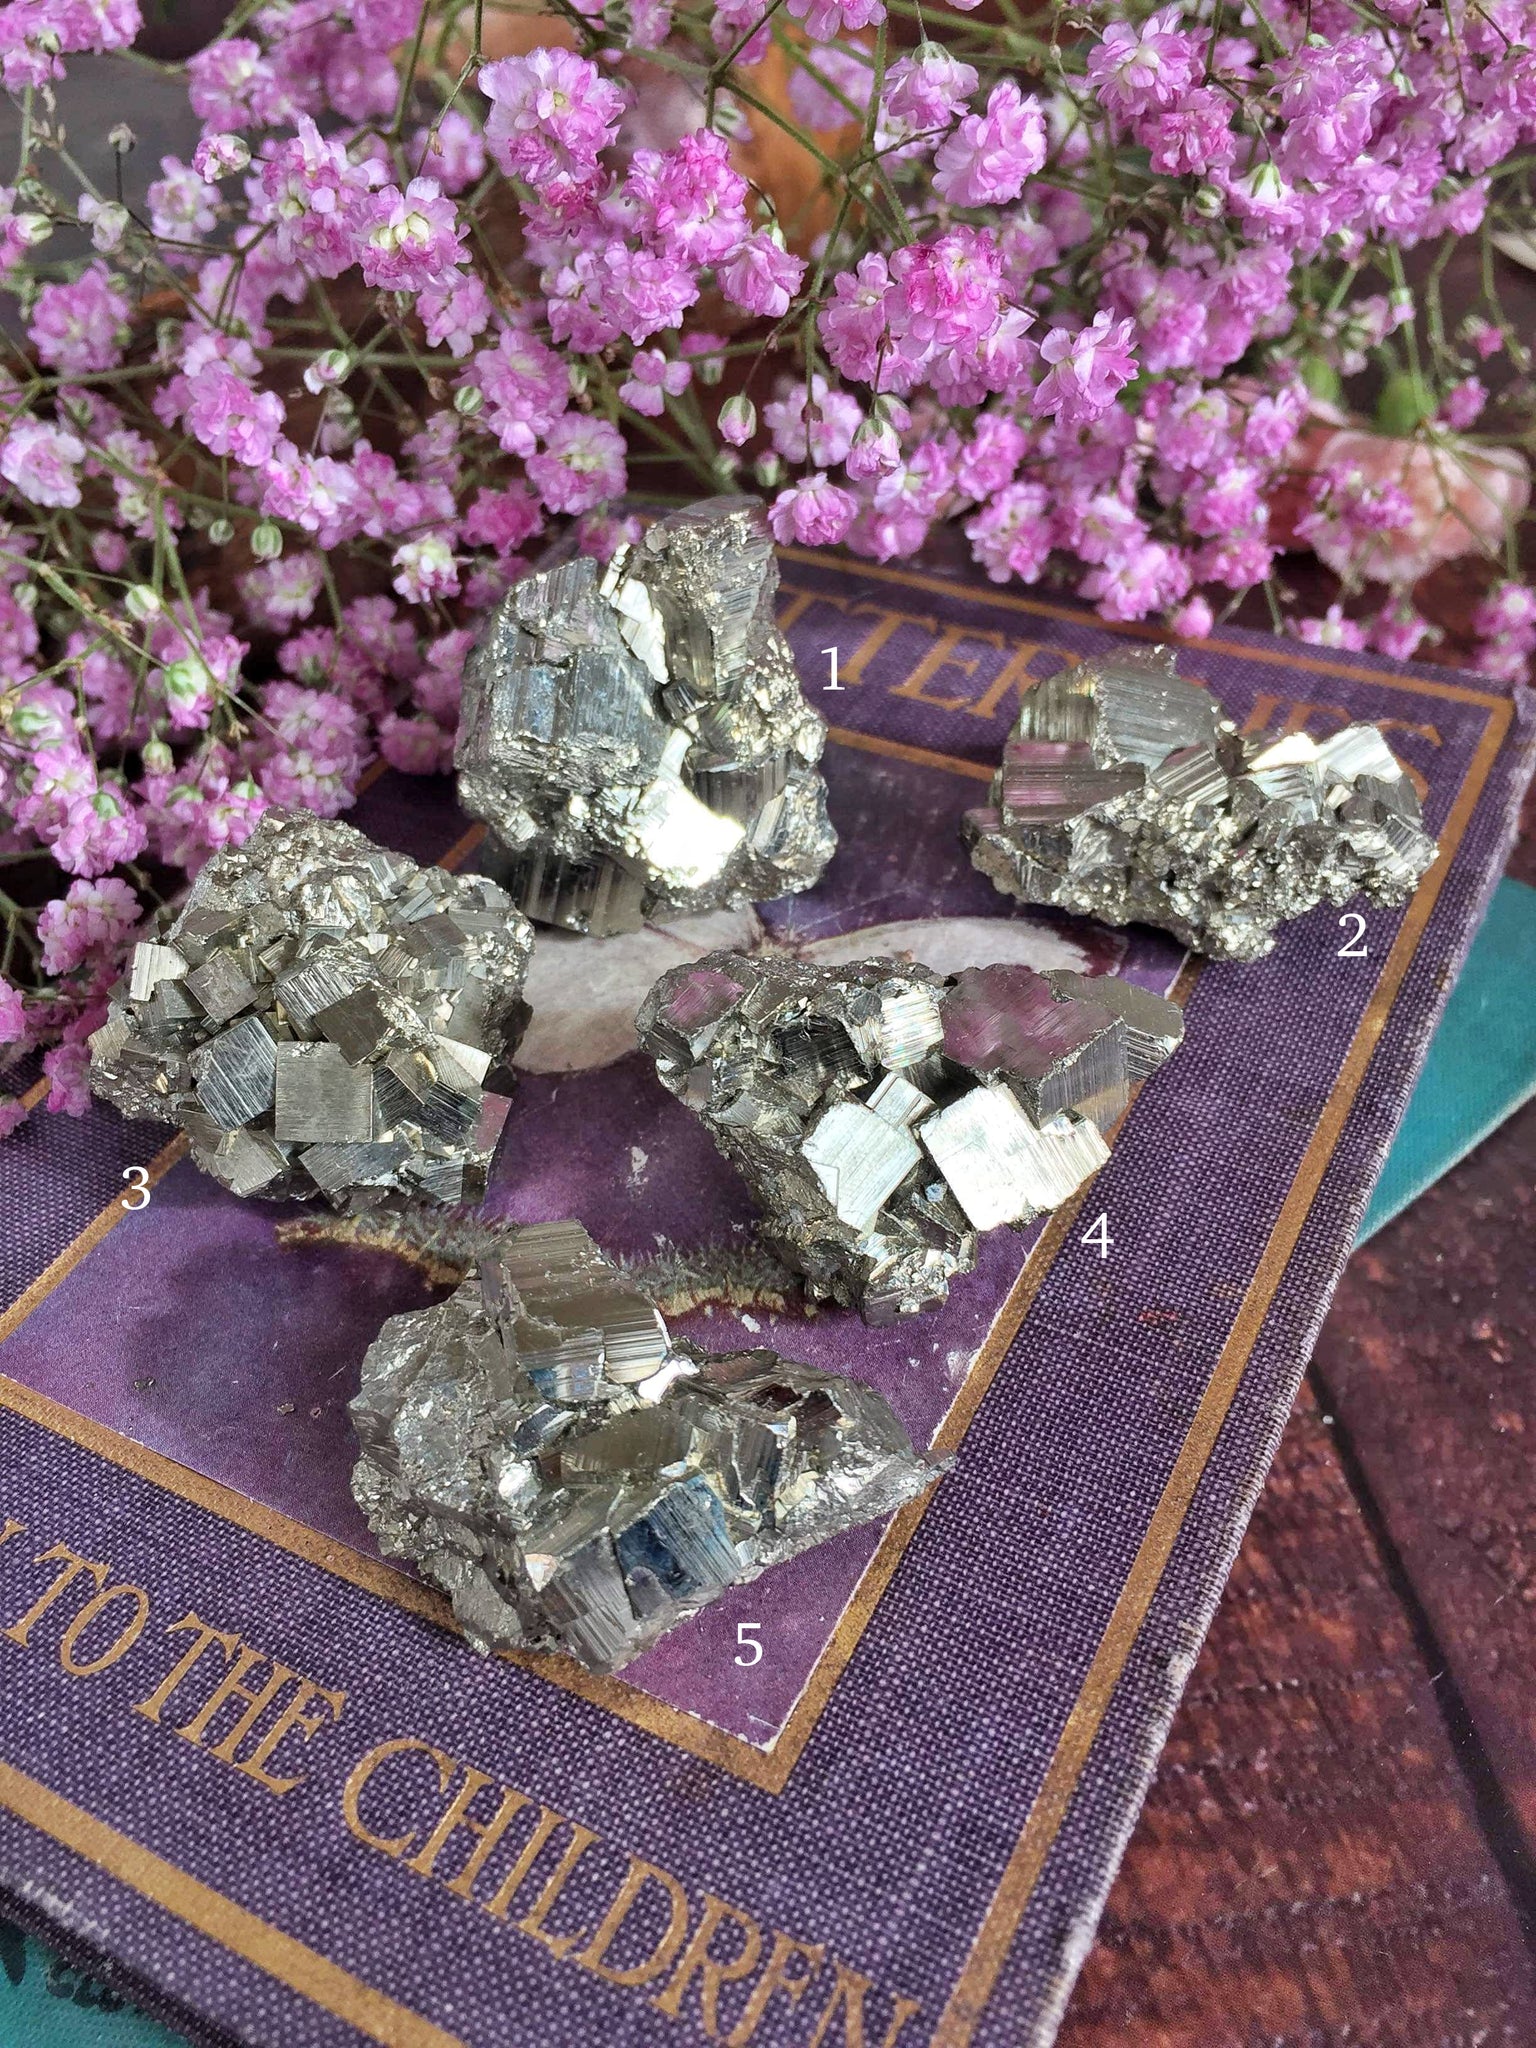 Rare high quality pyrite cube clusters